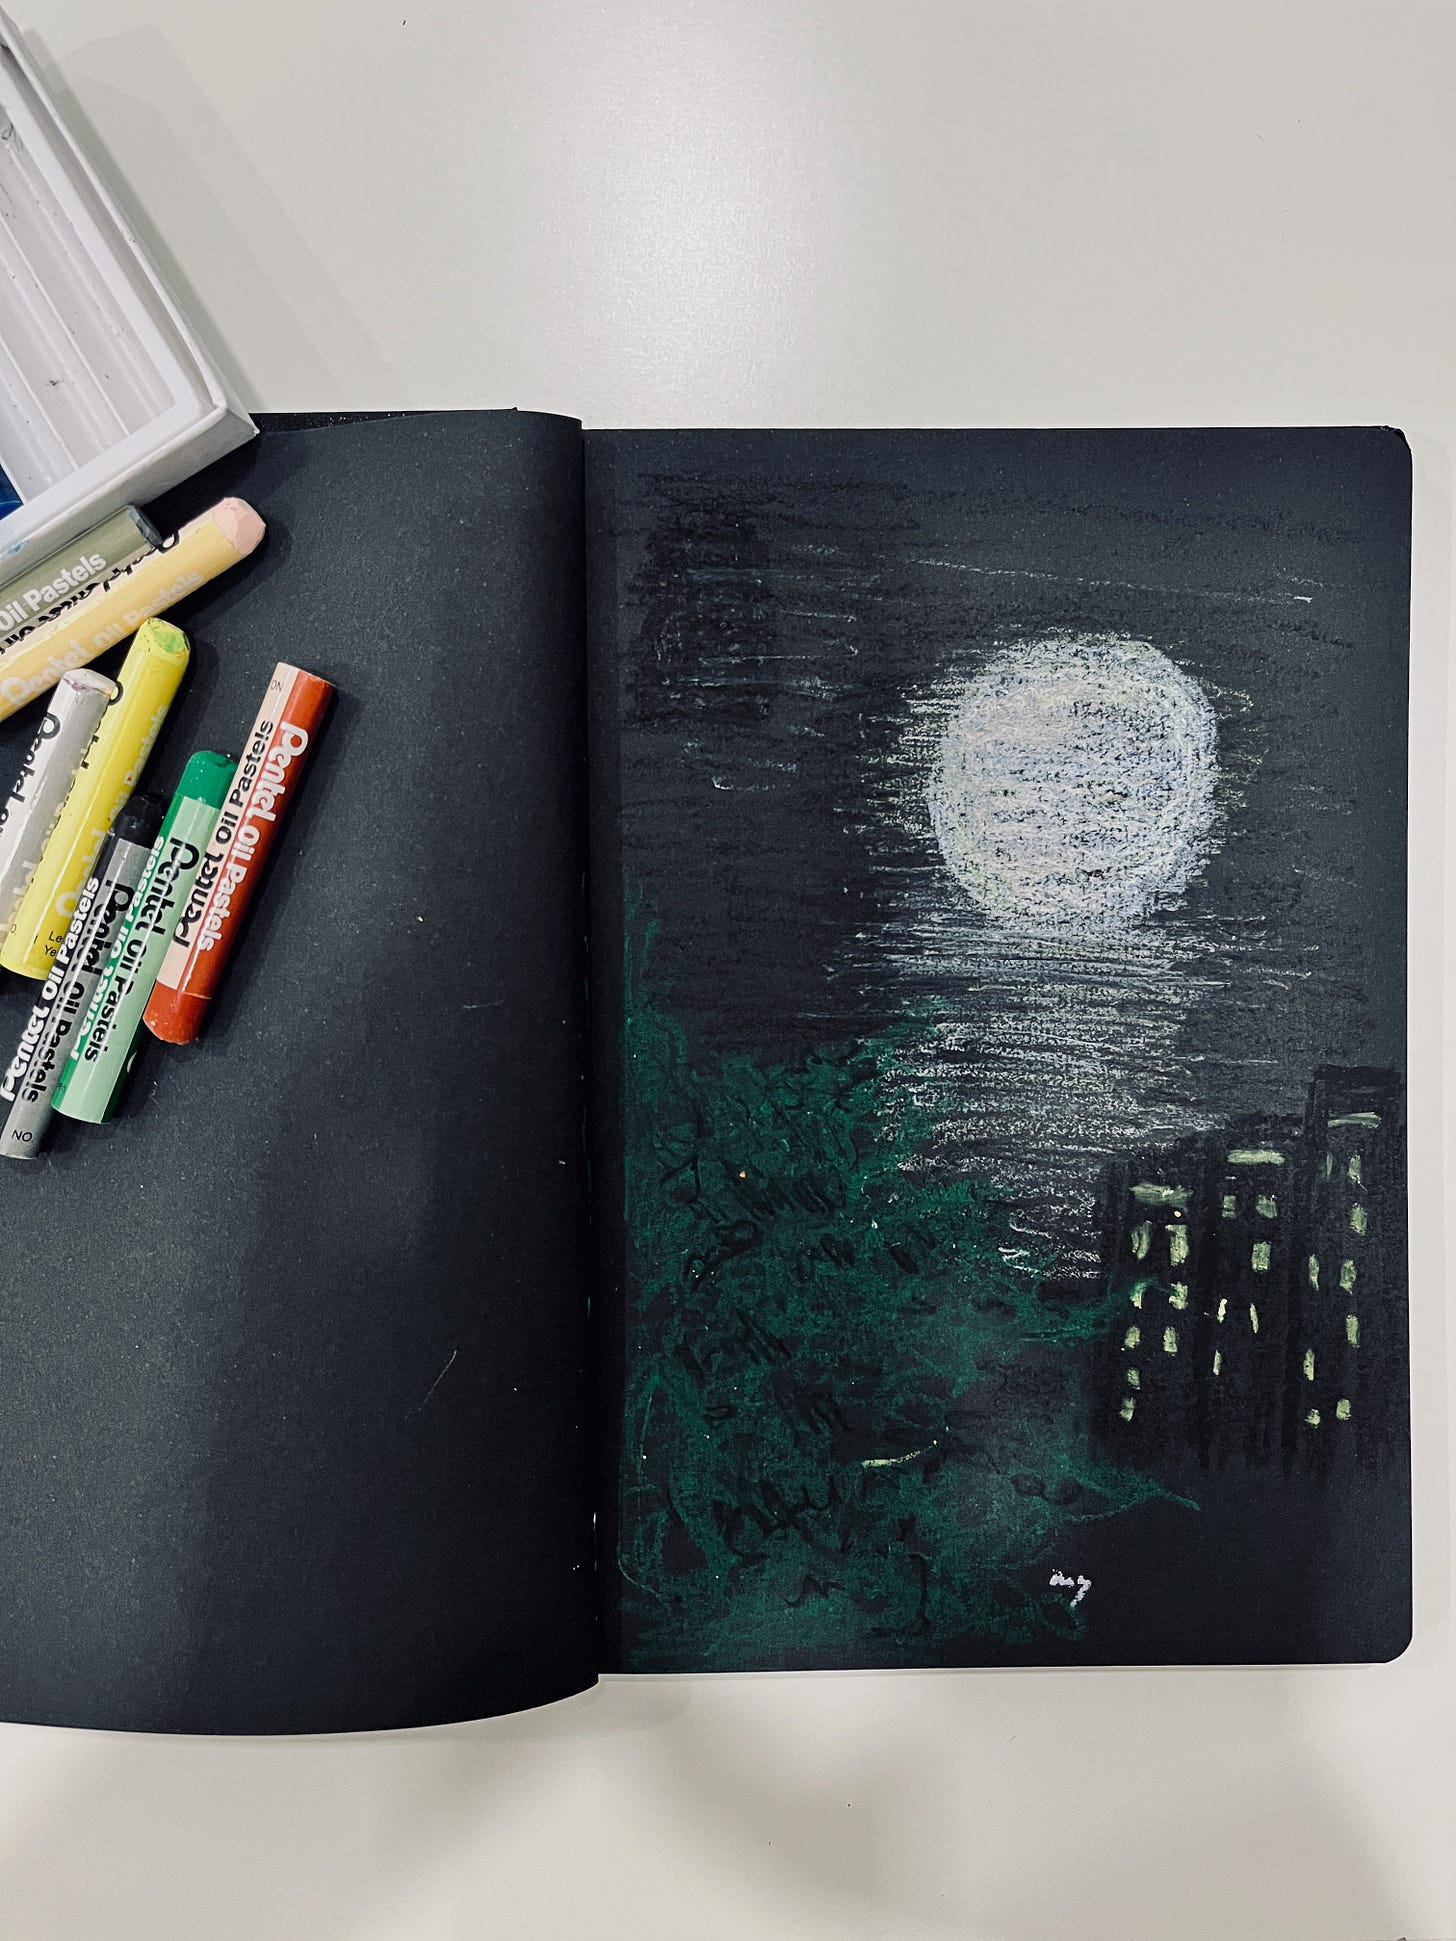 image: a black colour paper notebook with oil pastel sketch of a full moon scene